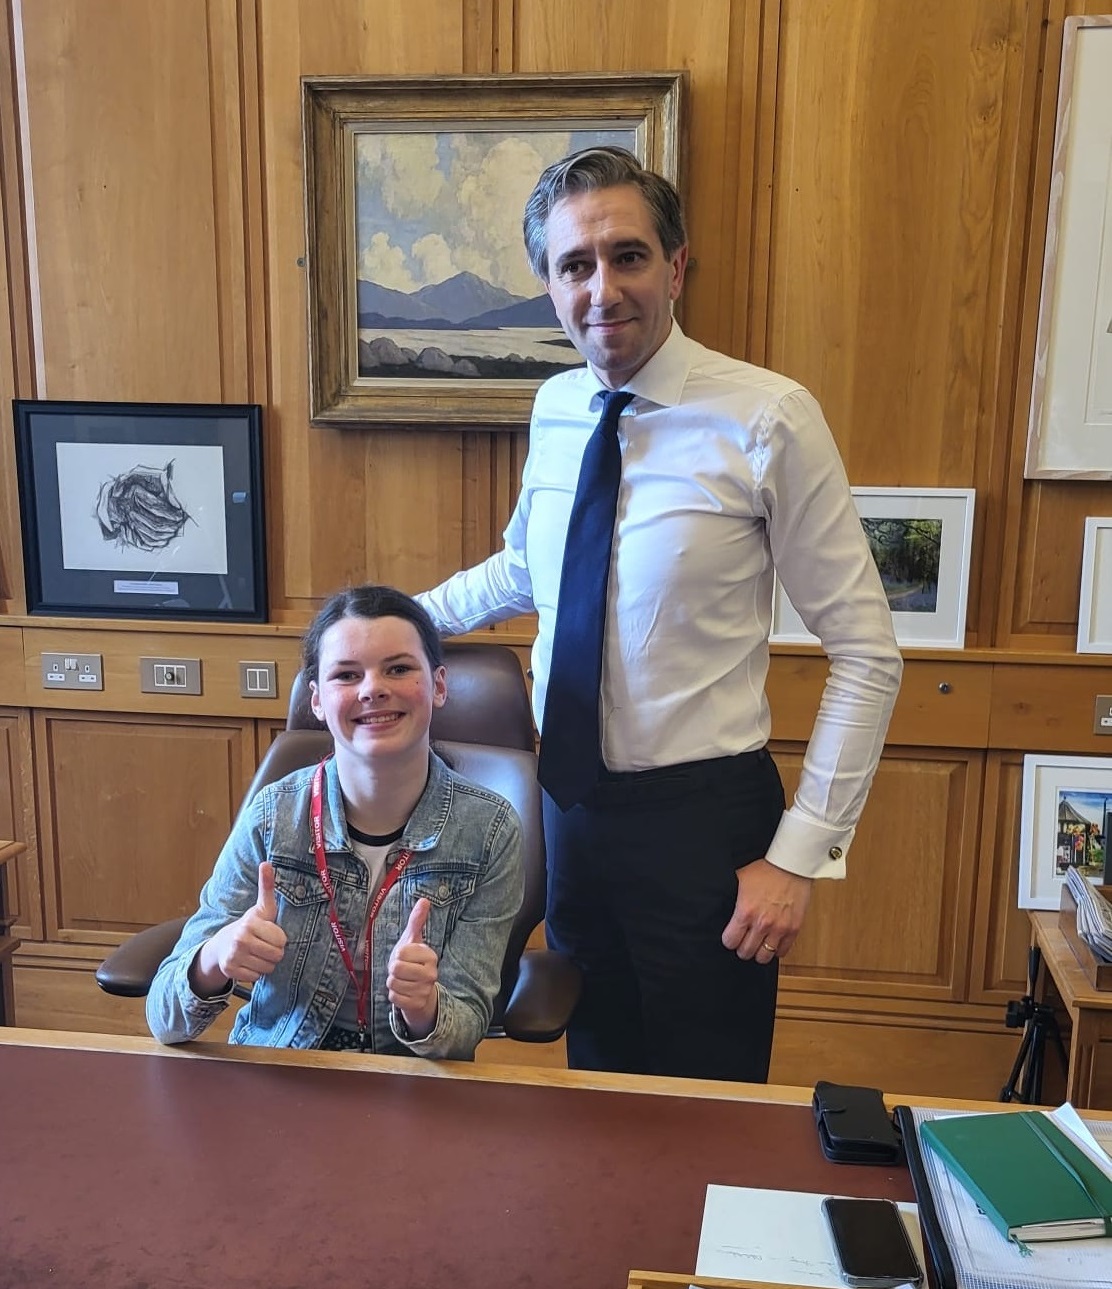 13-year-old Cara Darmody with Taoiseach Simon Harris in his office at Government Buildings, 20-6-24